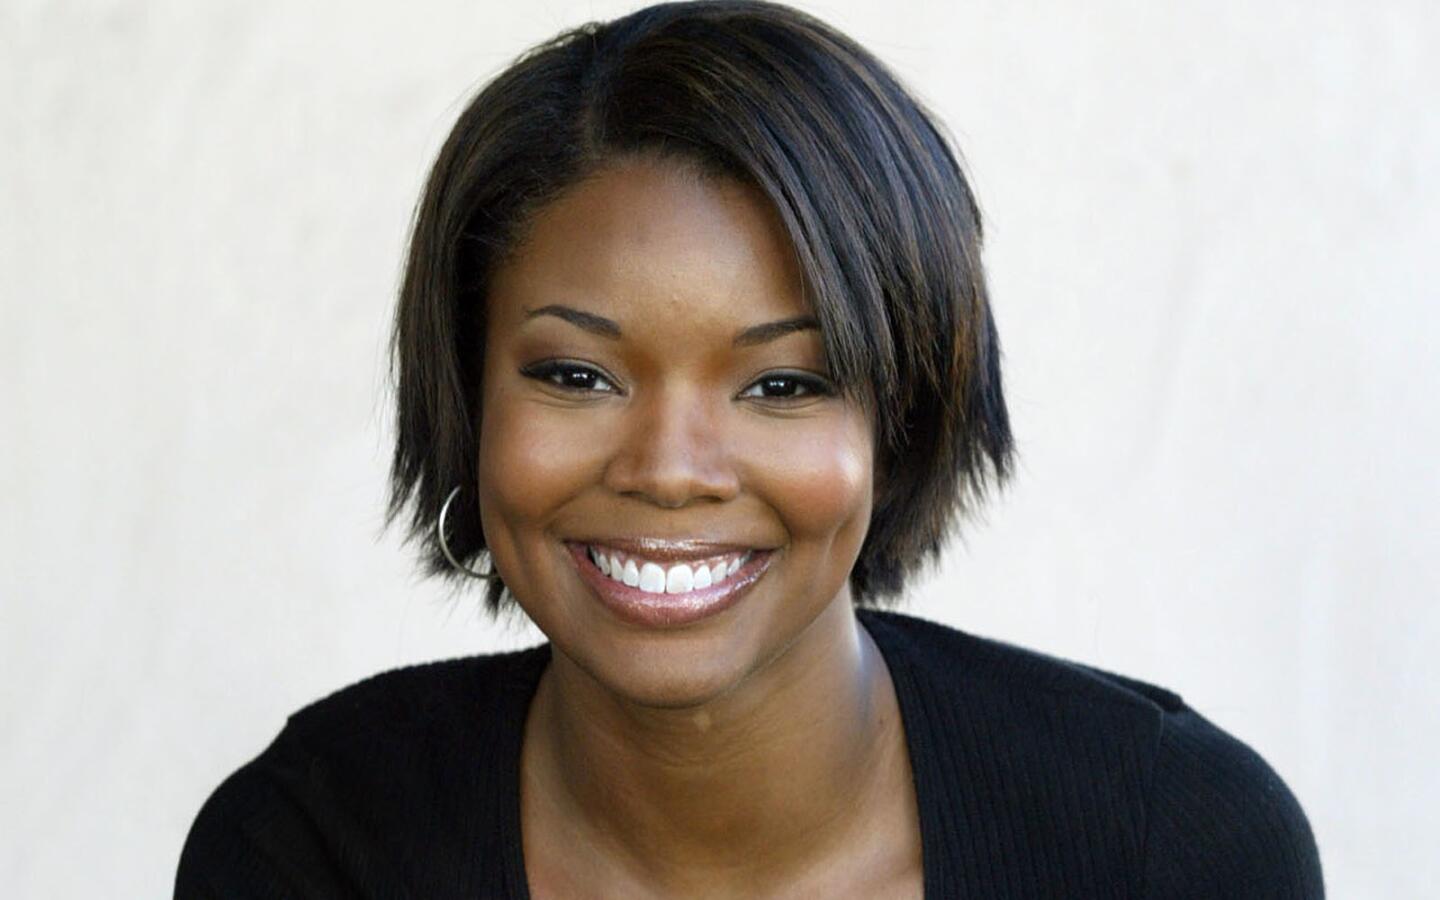 Actress Gabrielle Union burst onto the scene in "Bring It On" opposite Kirsten Dunst and has steadliy been employed since then, even starring in her own television show, "Being Mary Jane."